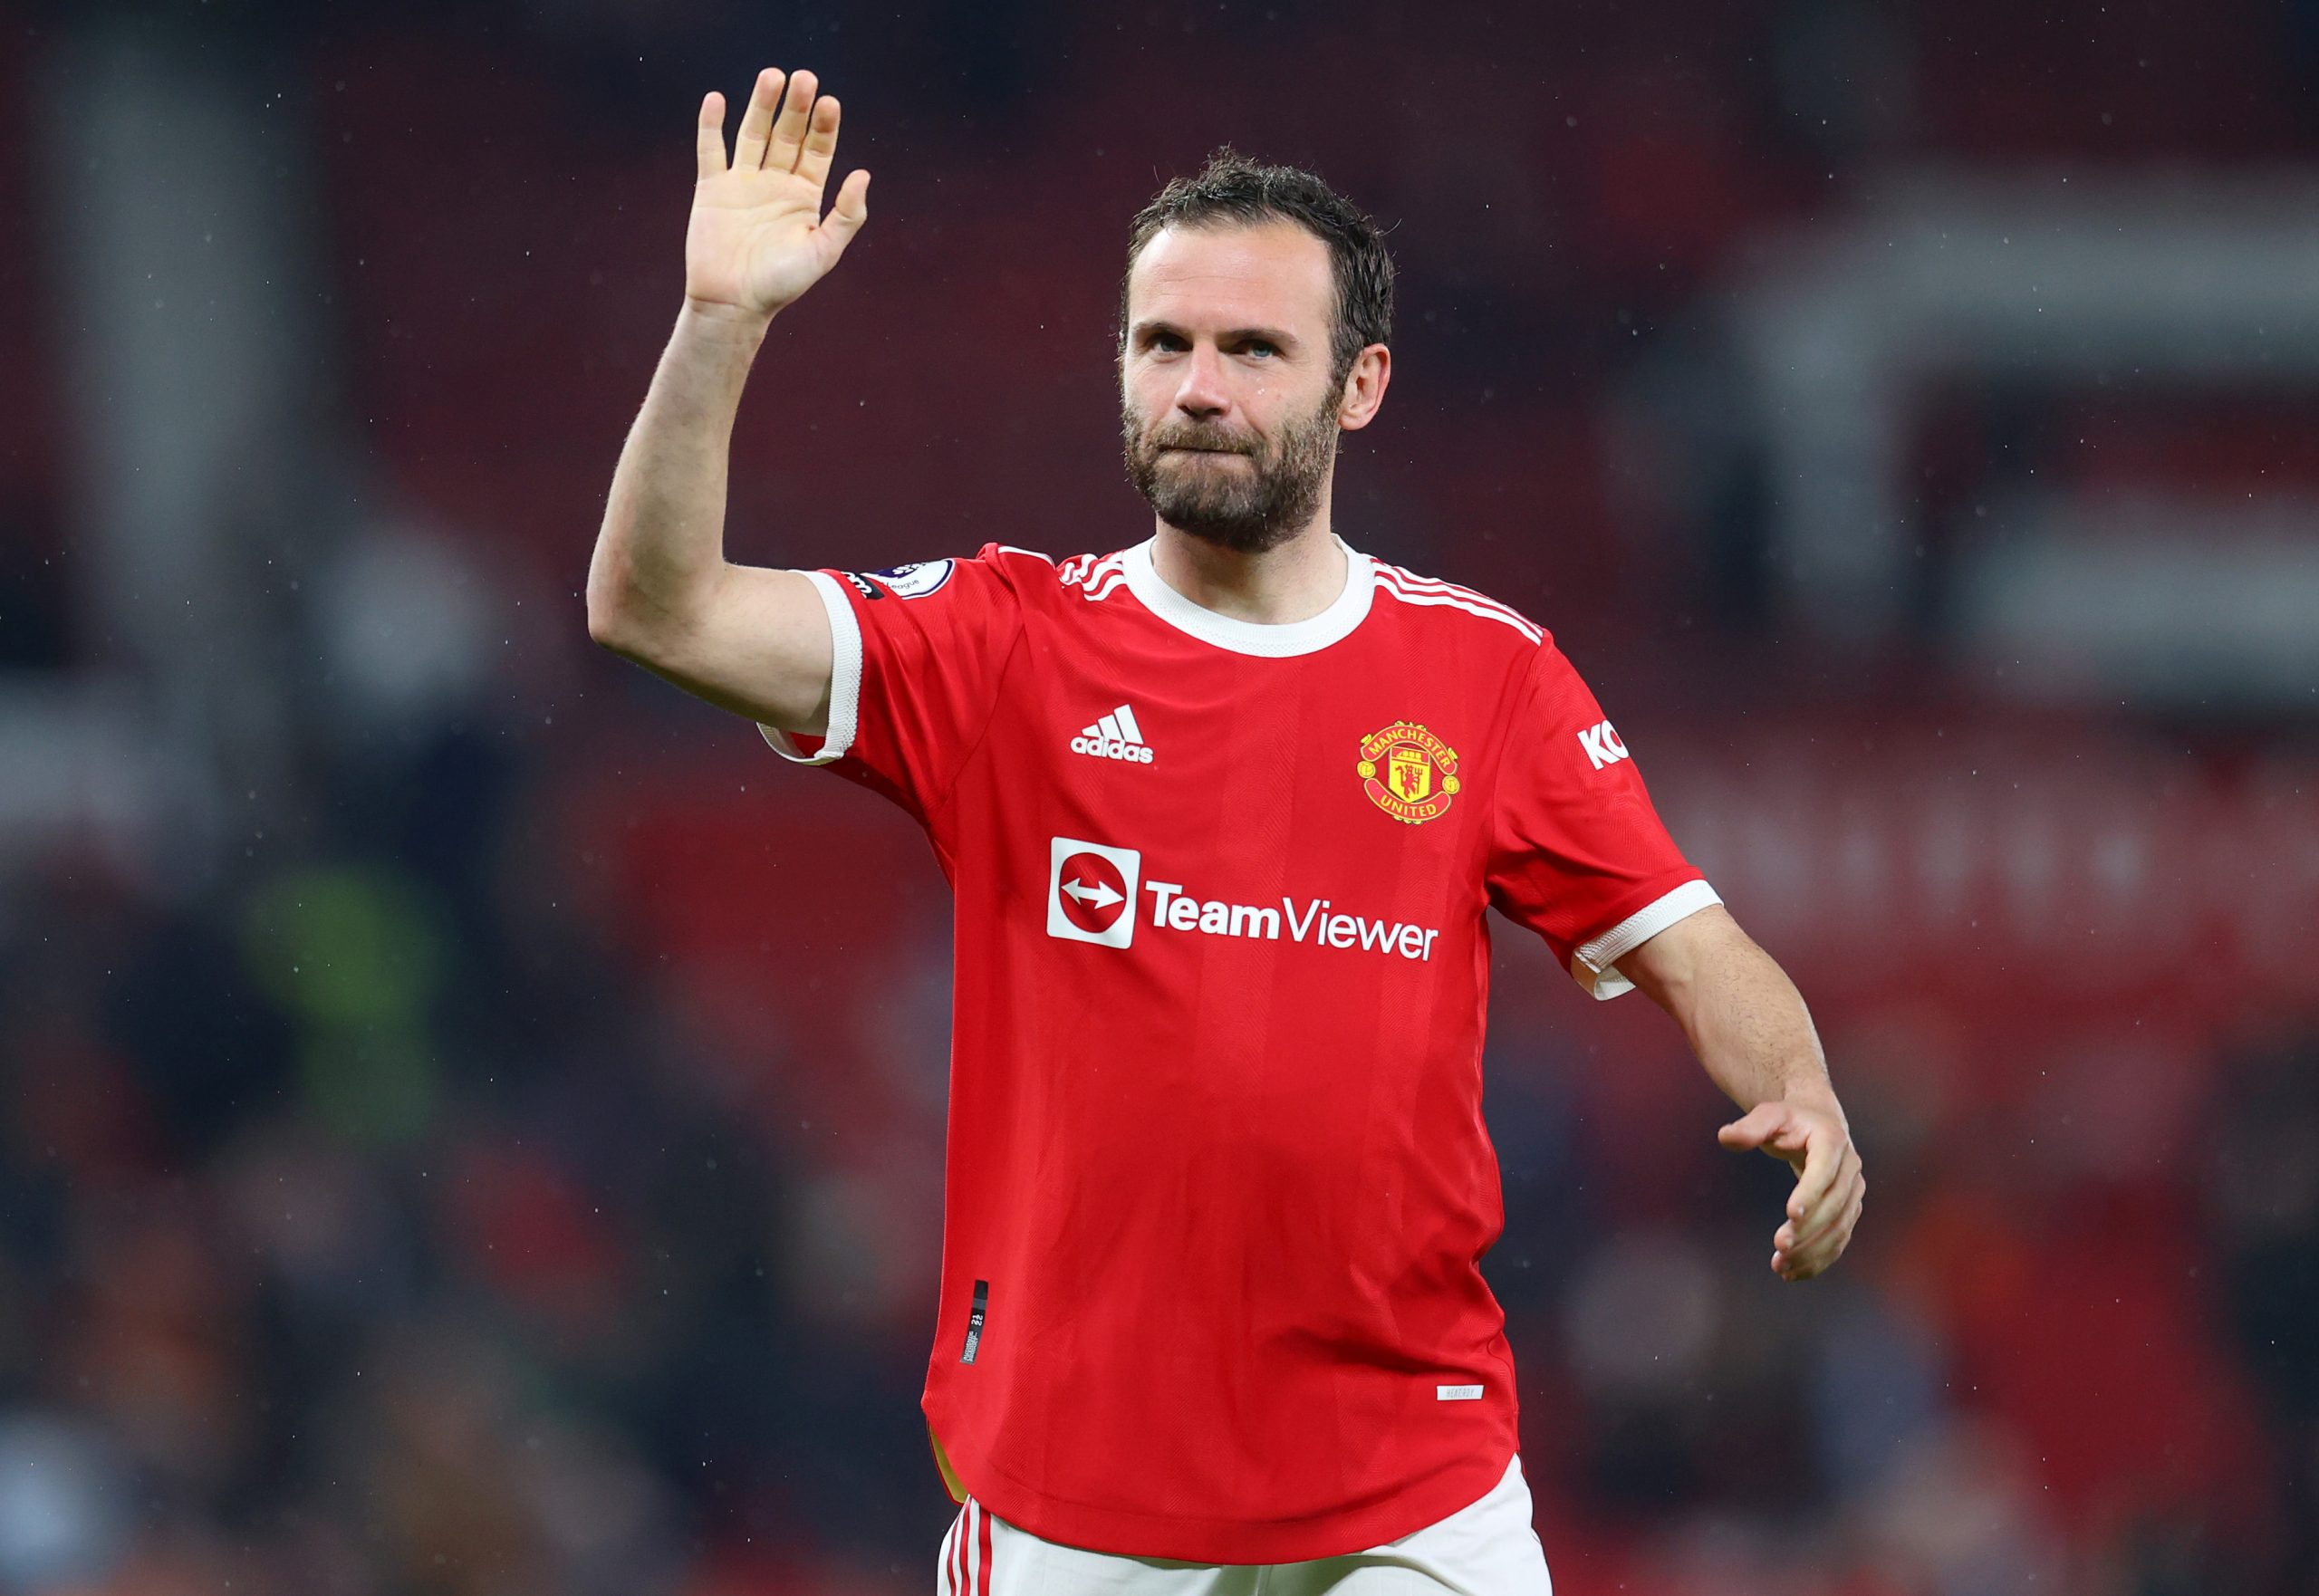 Juan Mata will speak with incoming Manchester United manager Erik ten Hag about his future.